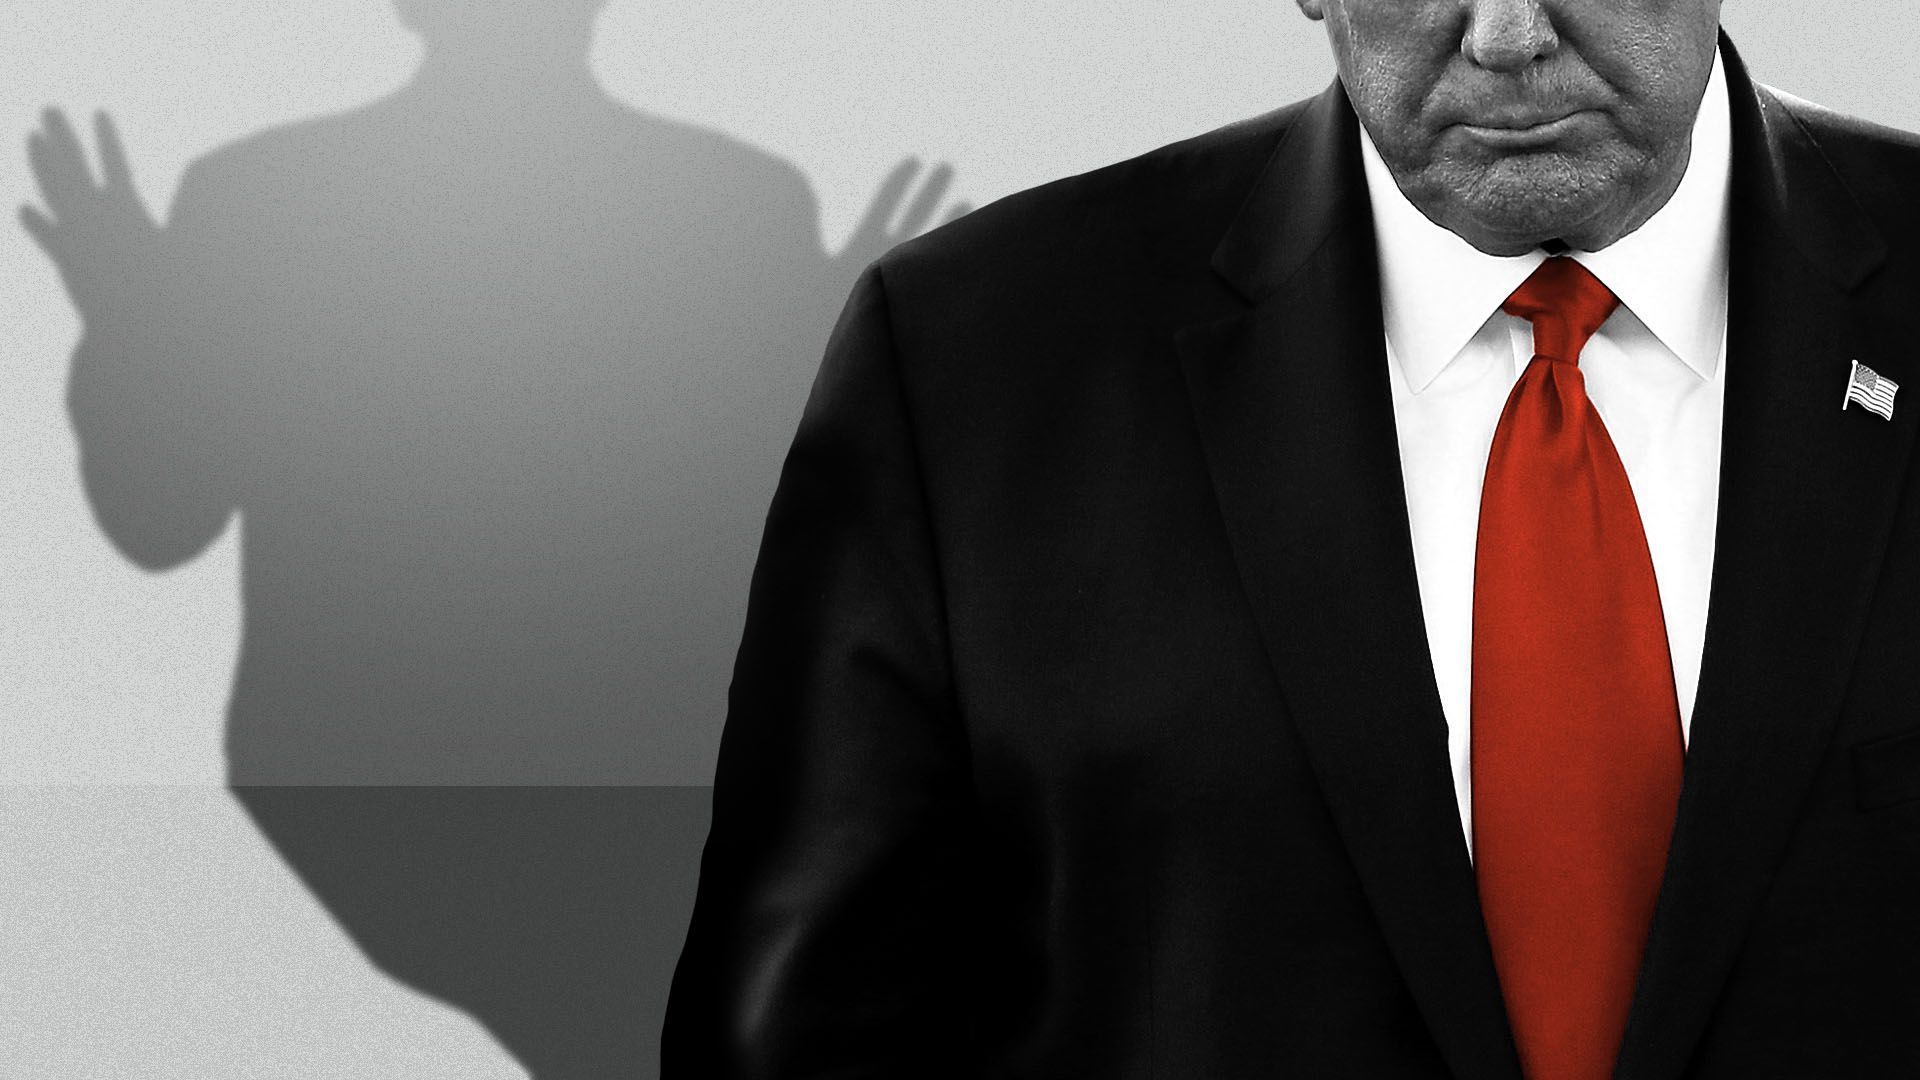 Trump with shadow